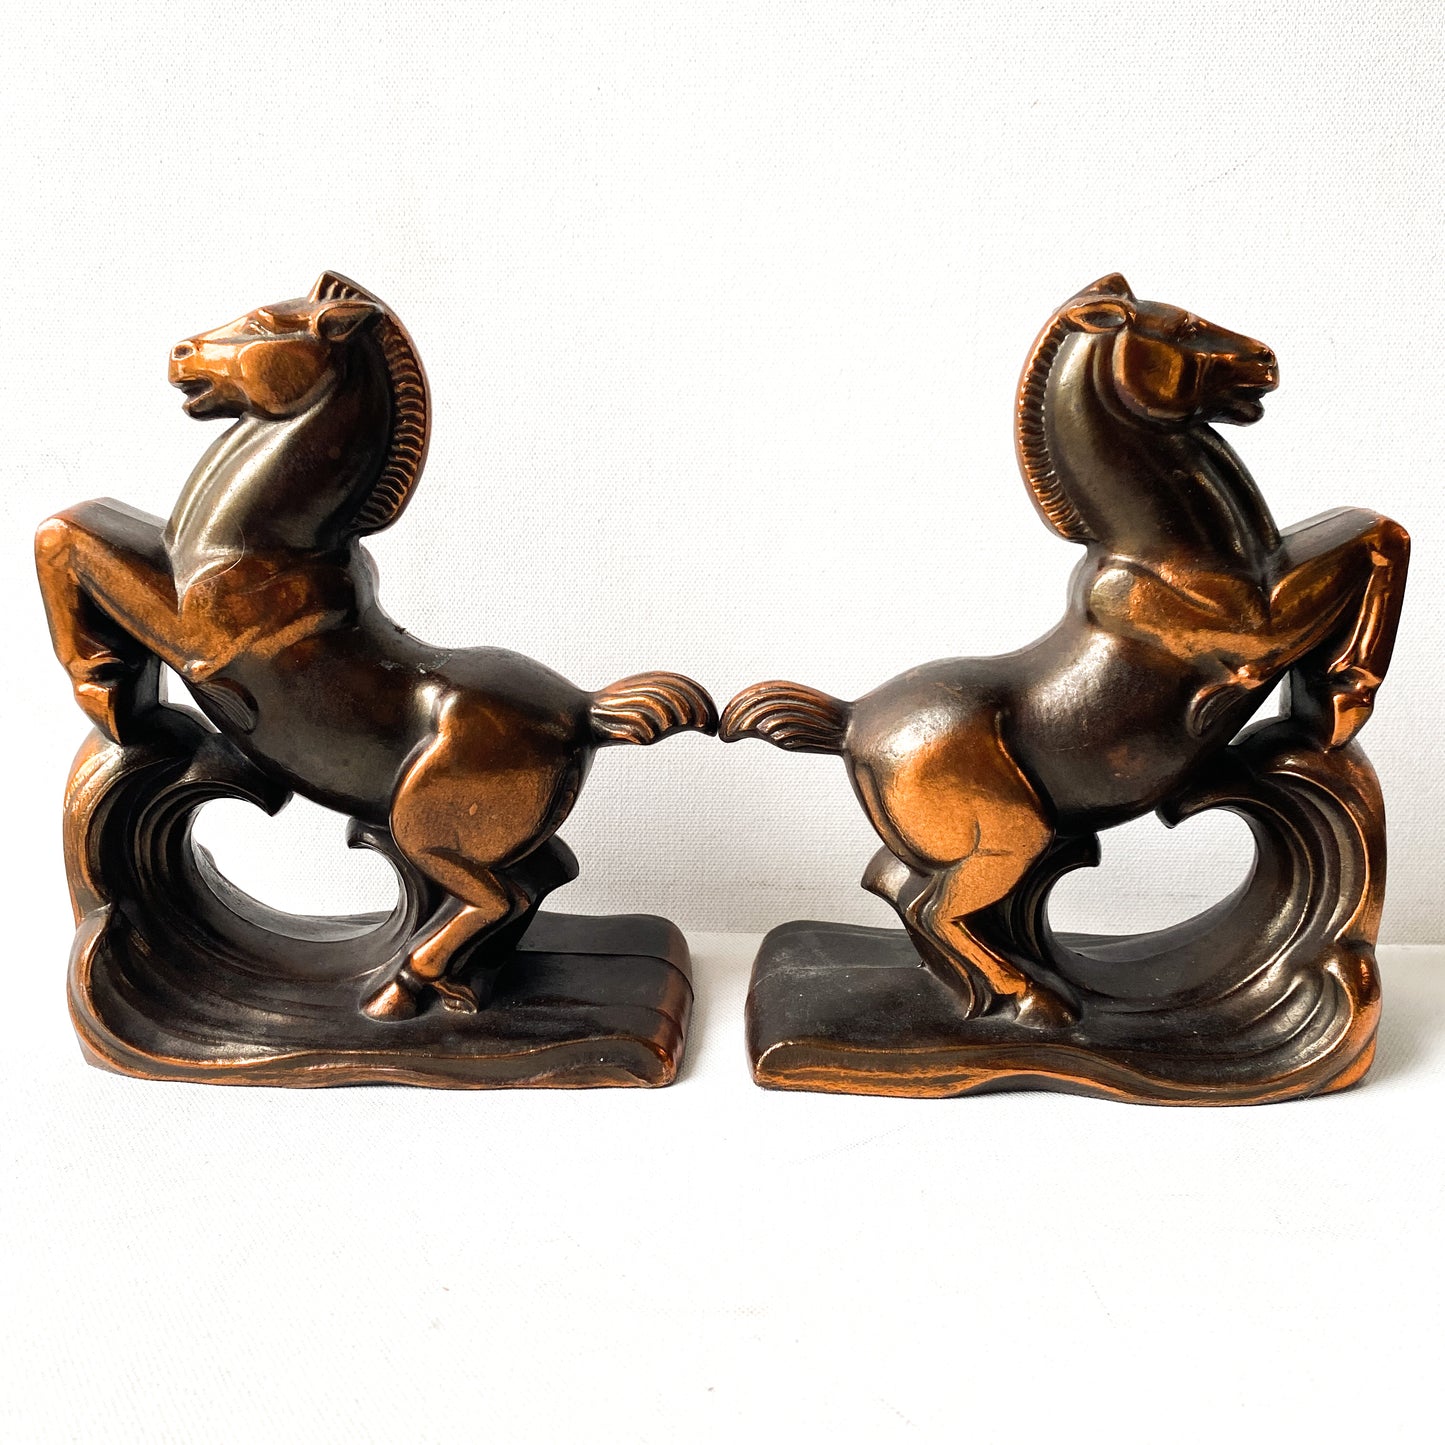 Vintage Art Deco Horse Bookends, Rearing Stallion, Copper and Bronze Tone